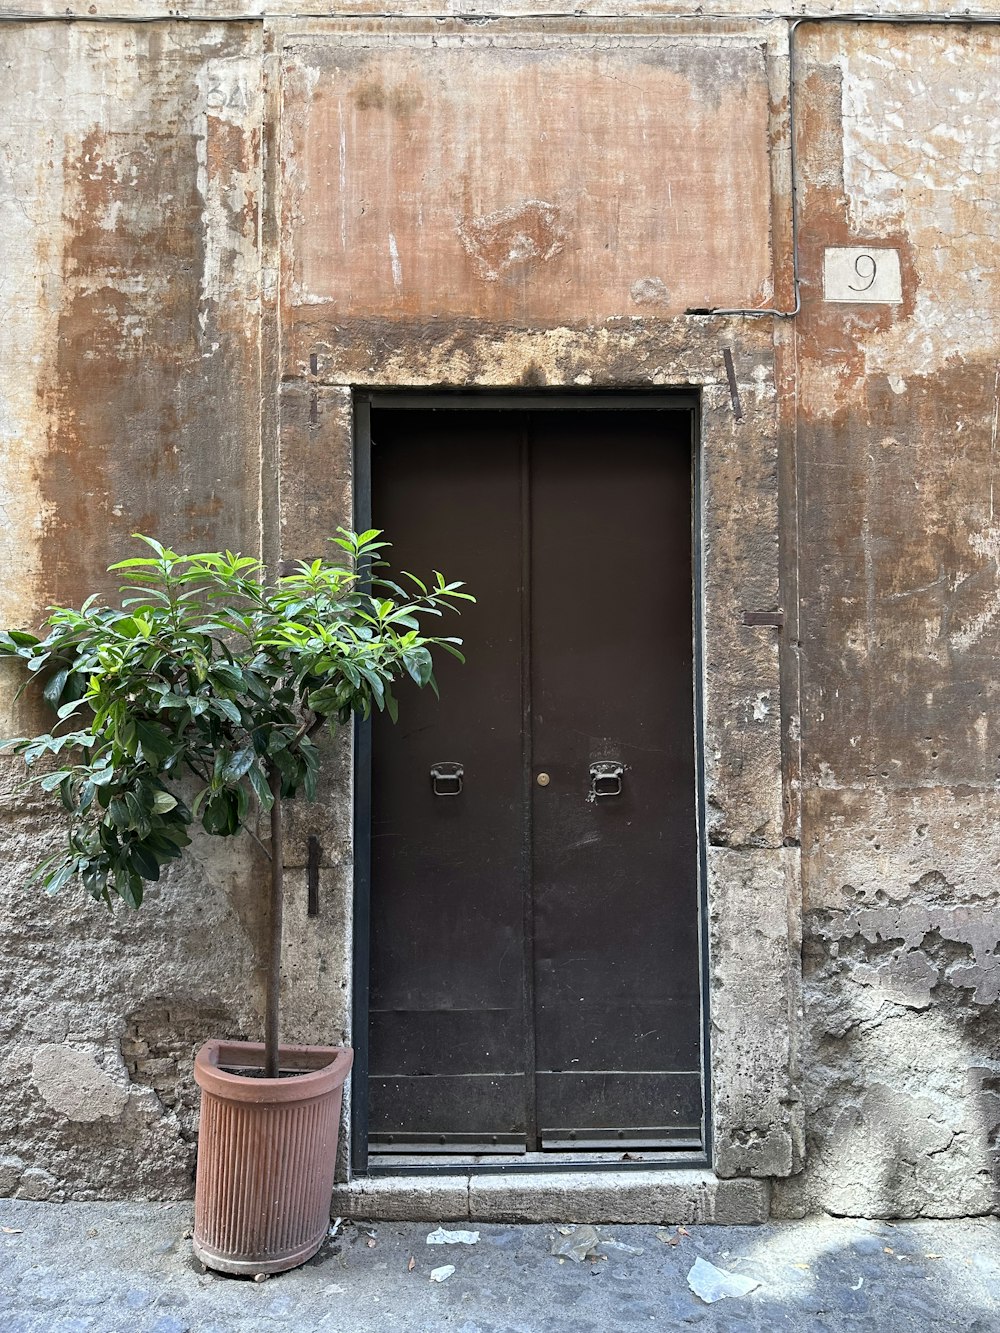 a potted plant sitting in front of a door